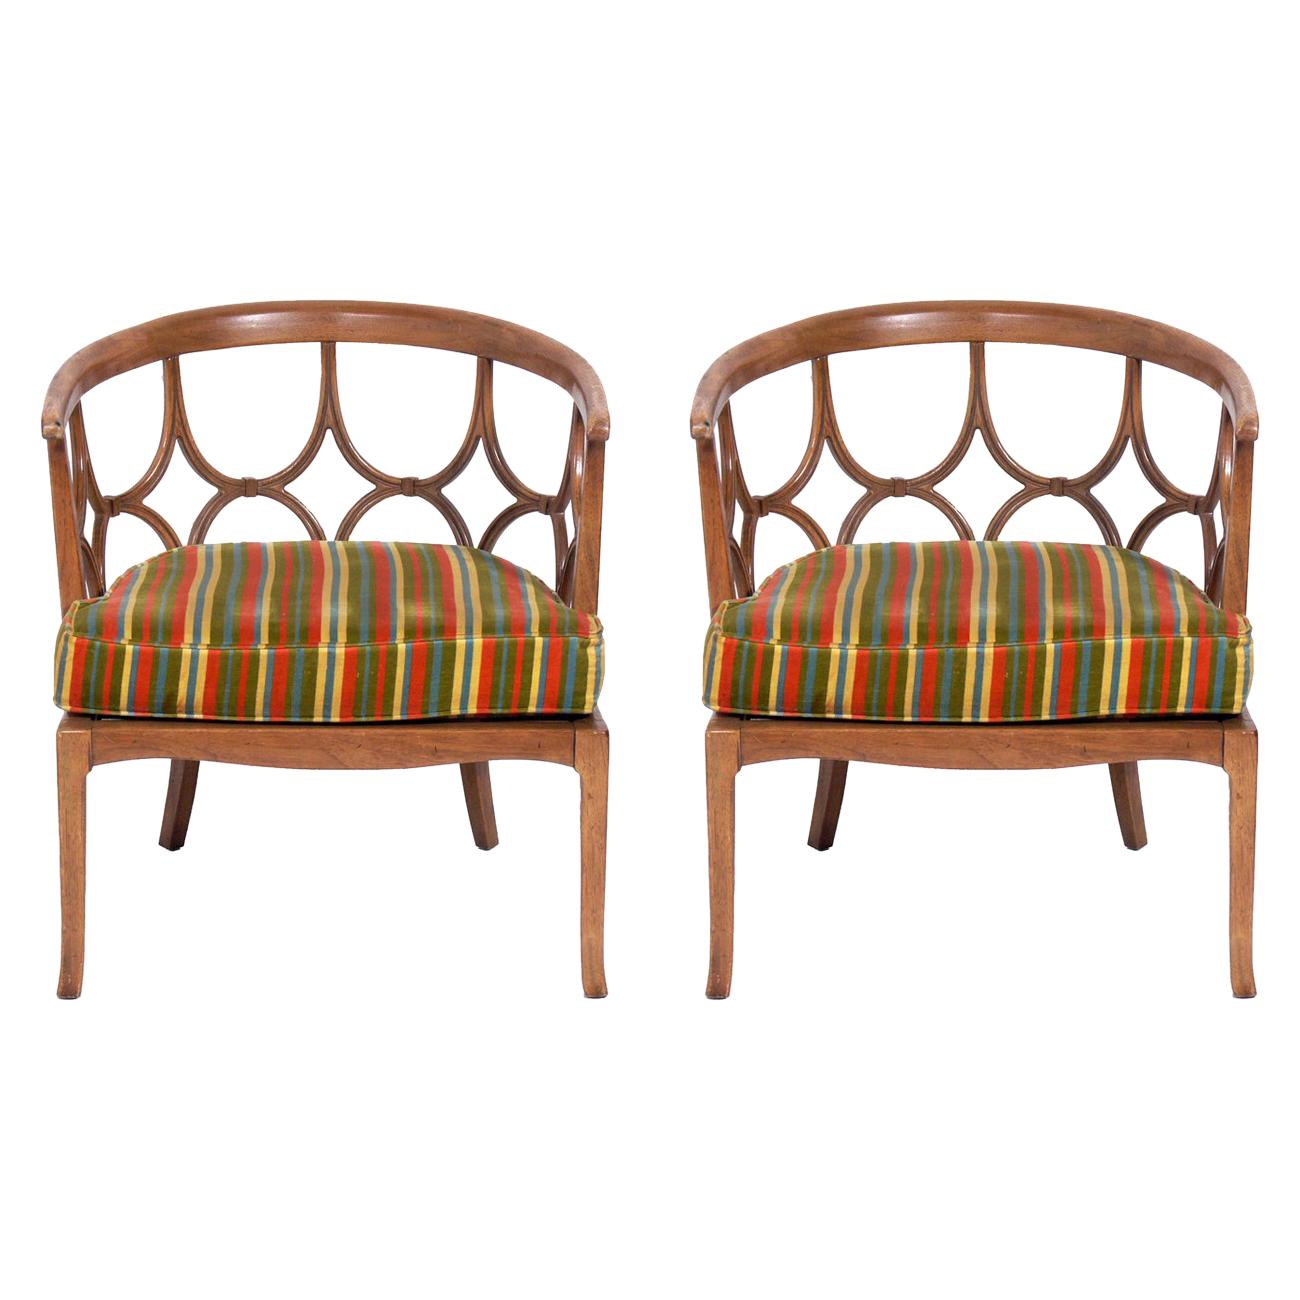 Pair of Sculptural Fret Back Chairs by Tomlinson